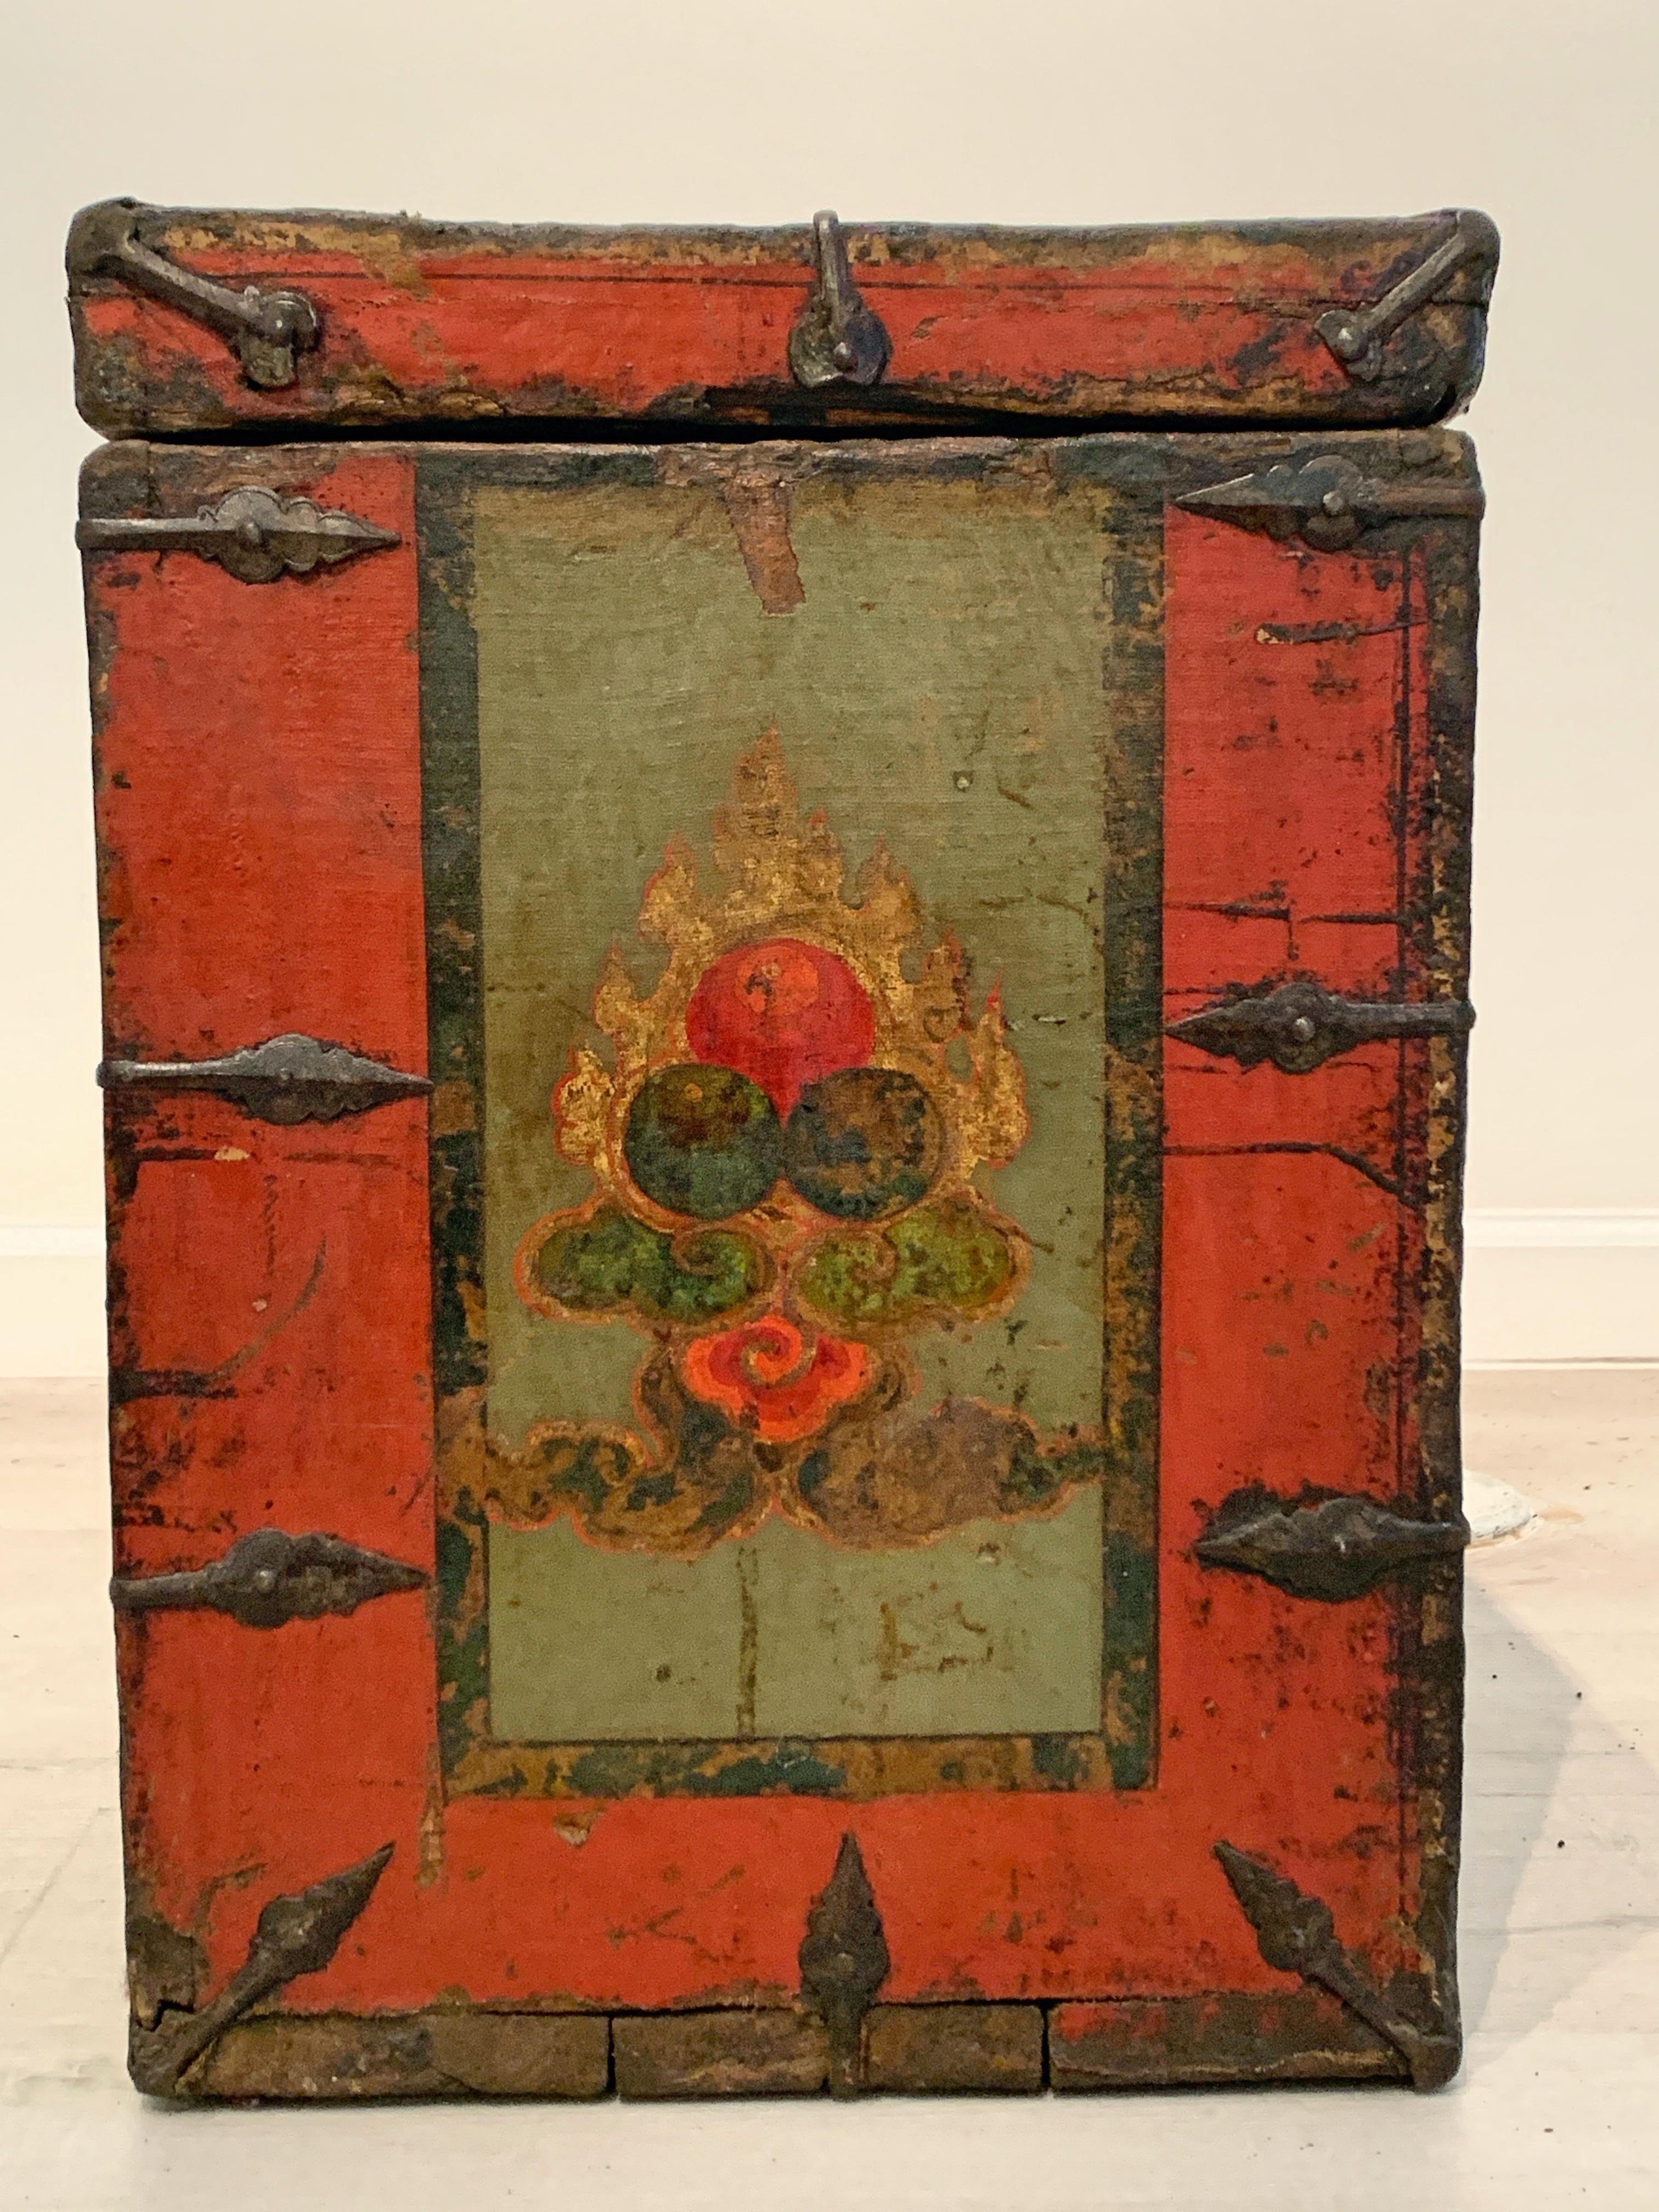 Tibetan Painted Trunk with Dragon and Brocade Design, 17th-18th Century, Tibet 6